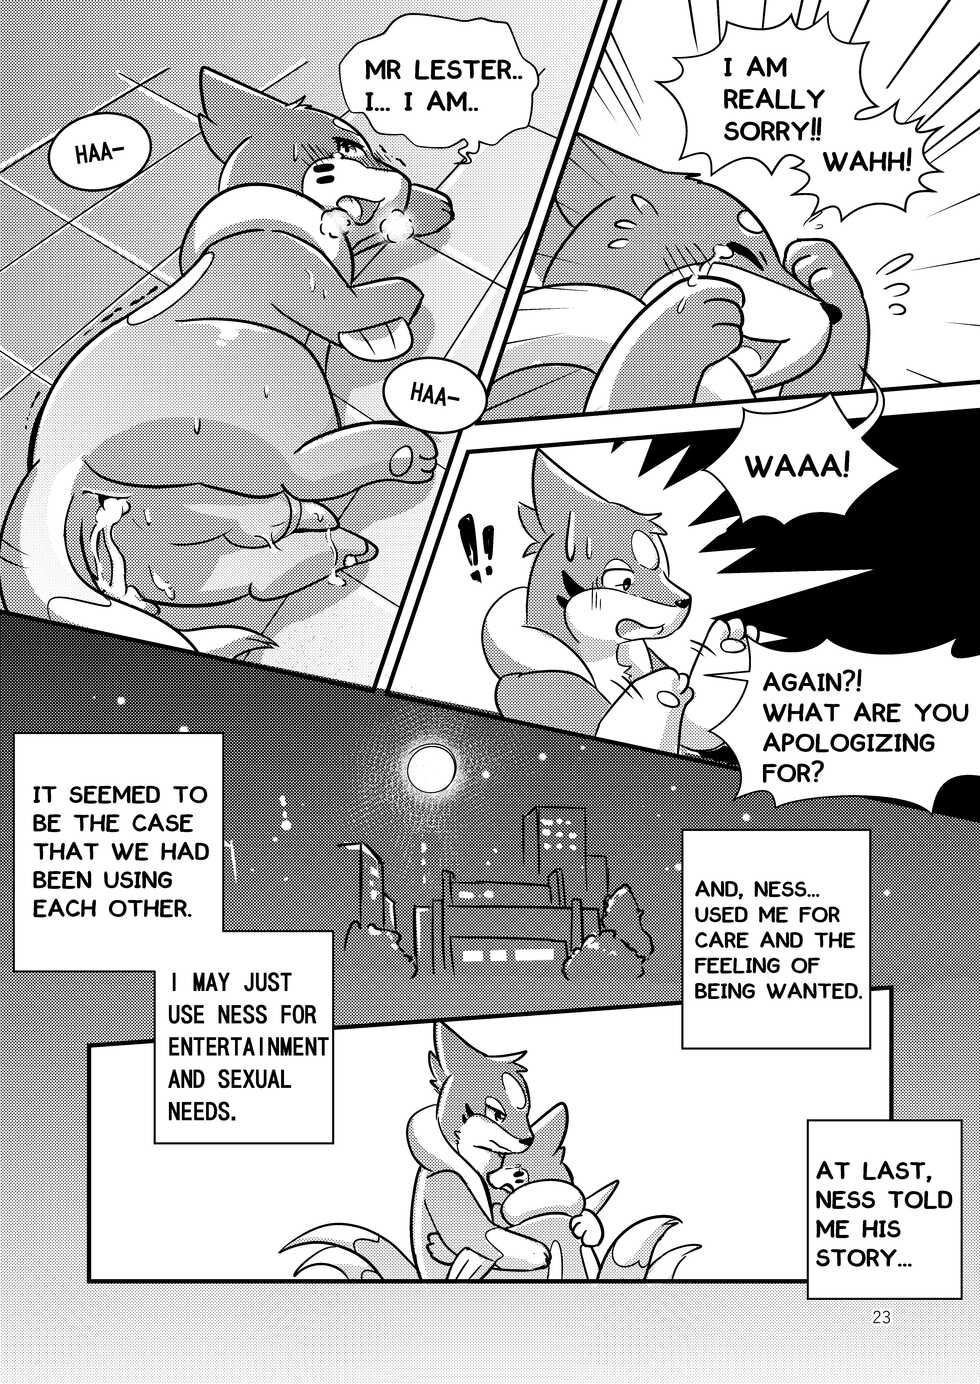 [RisenPaw] The Full Moon Part 1 - Page 25